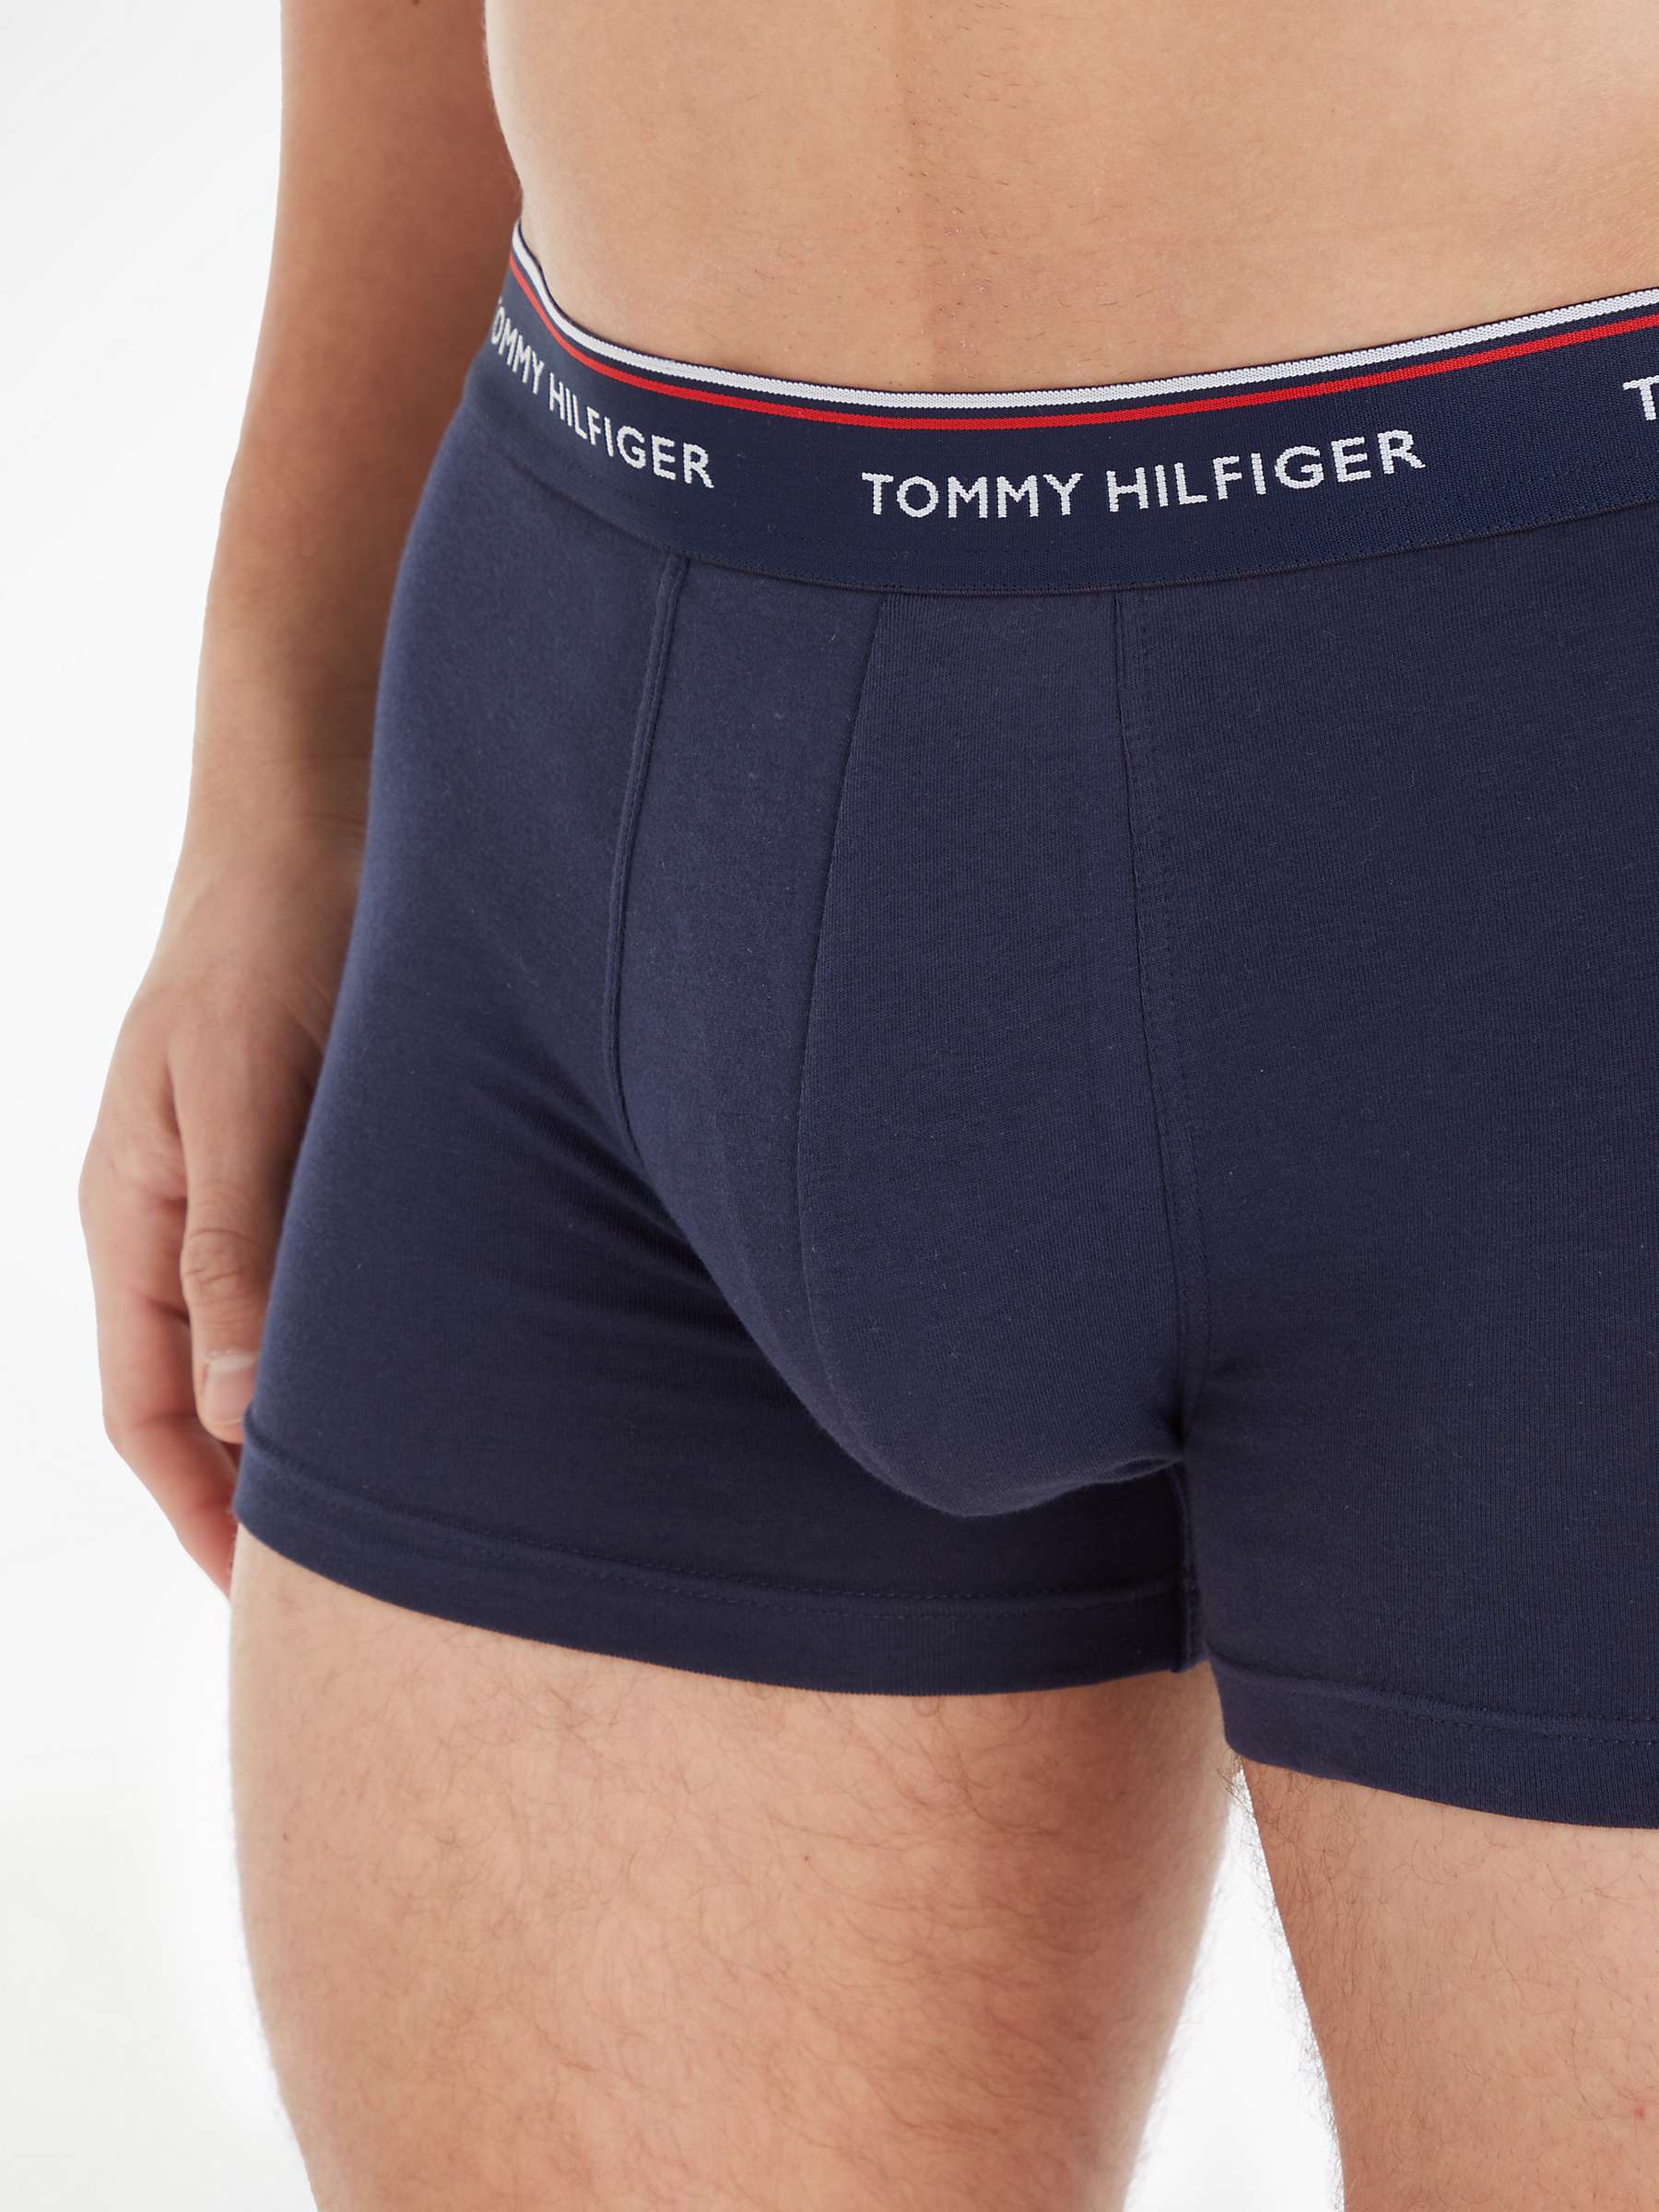 Buy Tommy Hilfiger Cotton Jersey Trunks, Pack of 3, Multi/Peacoat Online at johnlewis.com